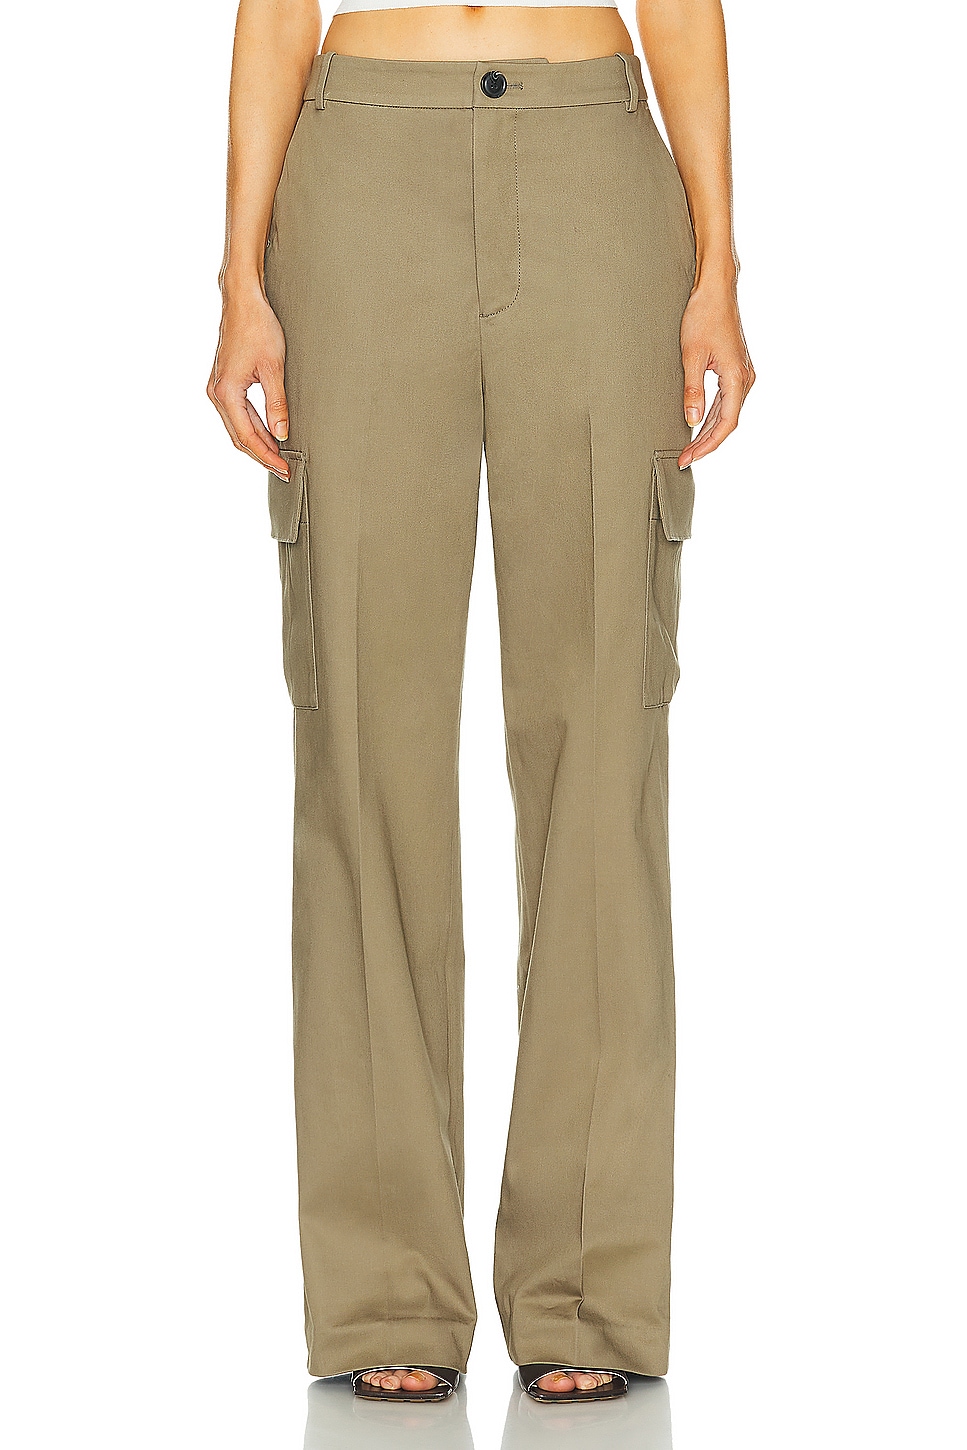 by Marianna Bellamy Pant in Olive